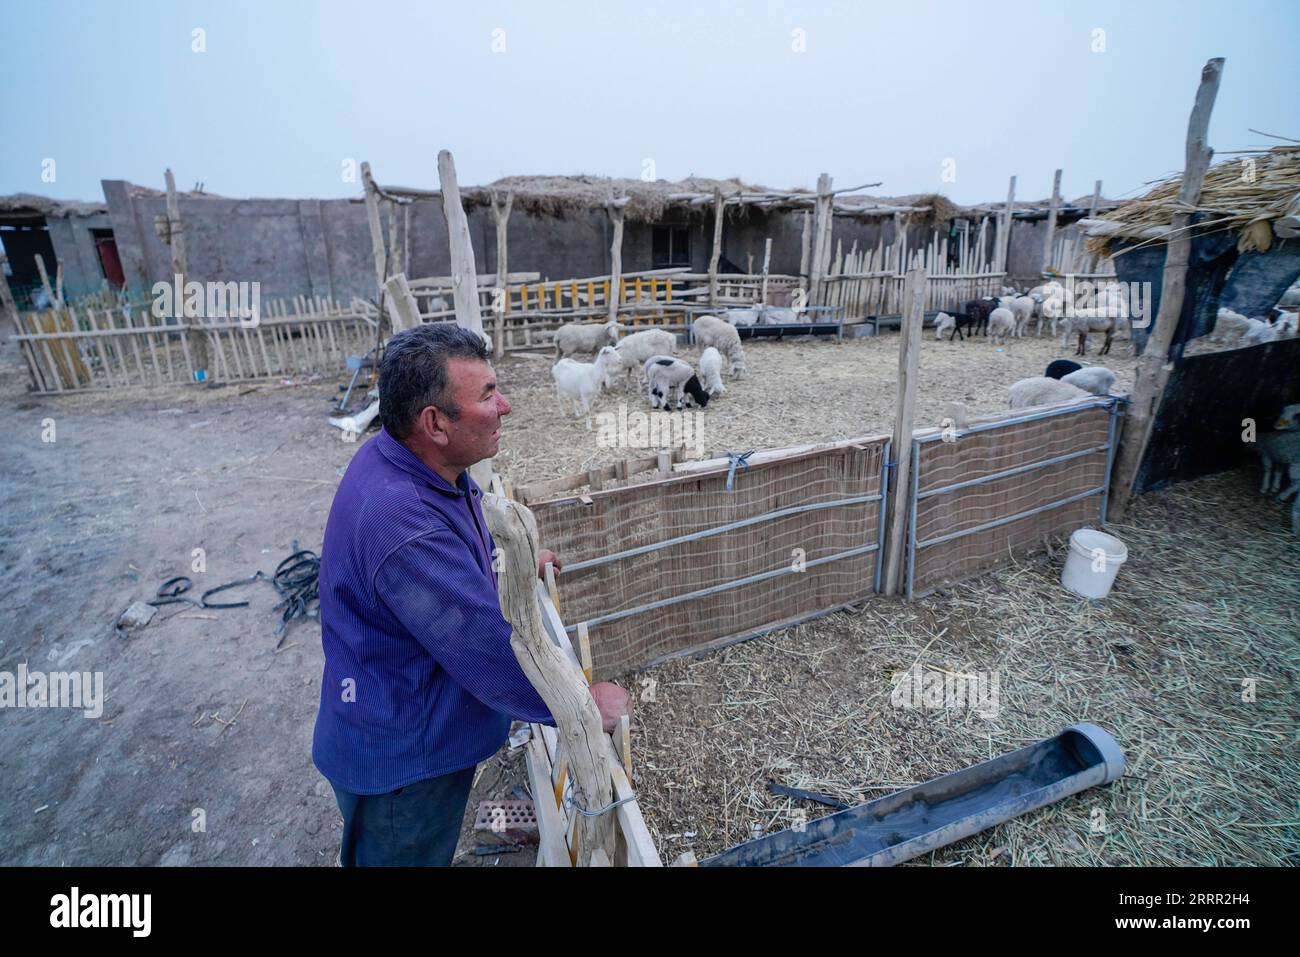 230427 -- YULI, April 27, 2023 -- Arkin Reyim cares for his sheep after completing his farm work in the Bax Mali Village of Yuli County, northwest China s Xinjiang Uygur Autonomous Region, April 21, 2023. Arkin Reyim is a 51-year-old cotton farmer with more than 300 mu 20 hectares of cotton fields in the Bax Mali Village of Yuli County in Xinjiang. Arkin s courage and unique vision has prompted him to start growing cotton in 2004 when he got married with his wife Hasiyat Kasim. Since then, Arkin has devoted himself into the cultivation of cotton for over 10 years, thus making him an experience Stock Photo